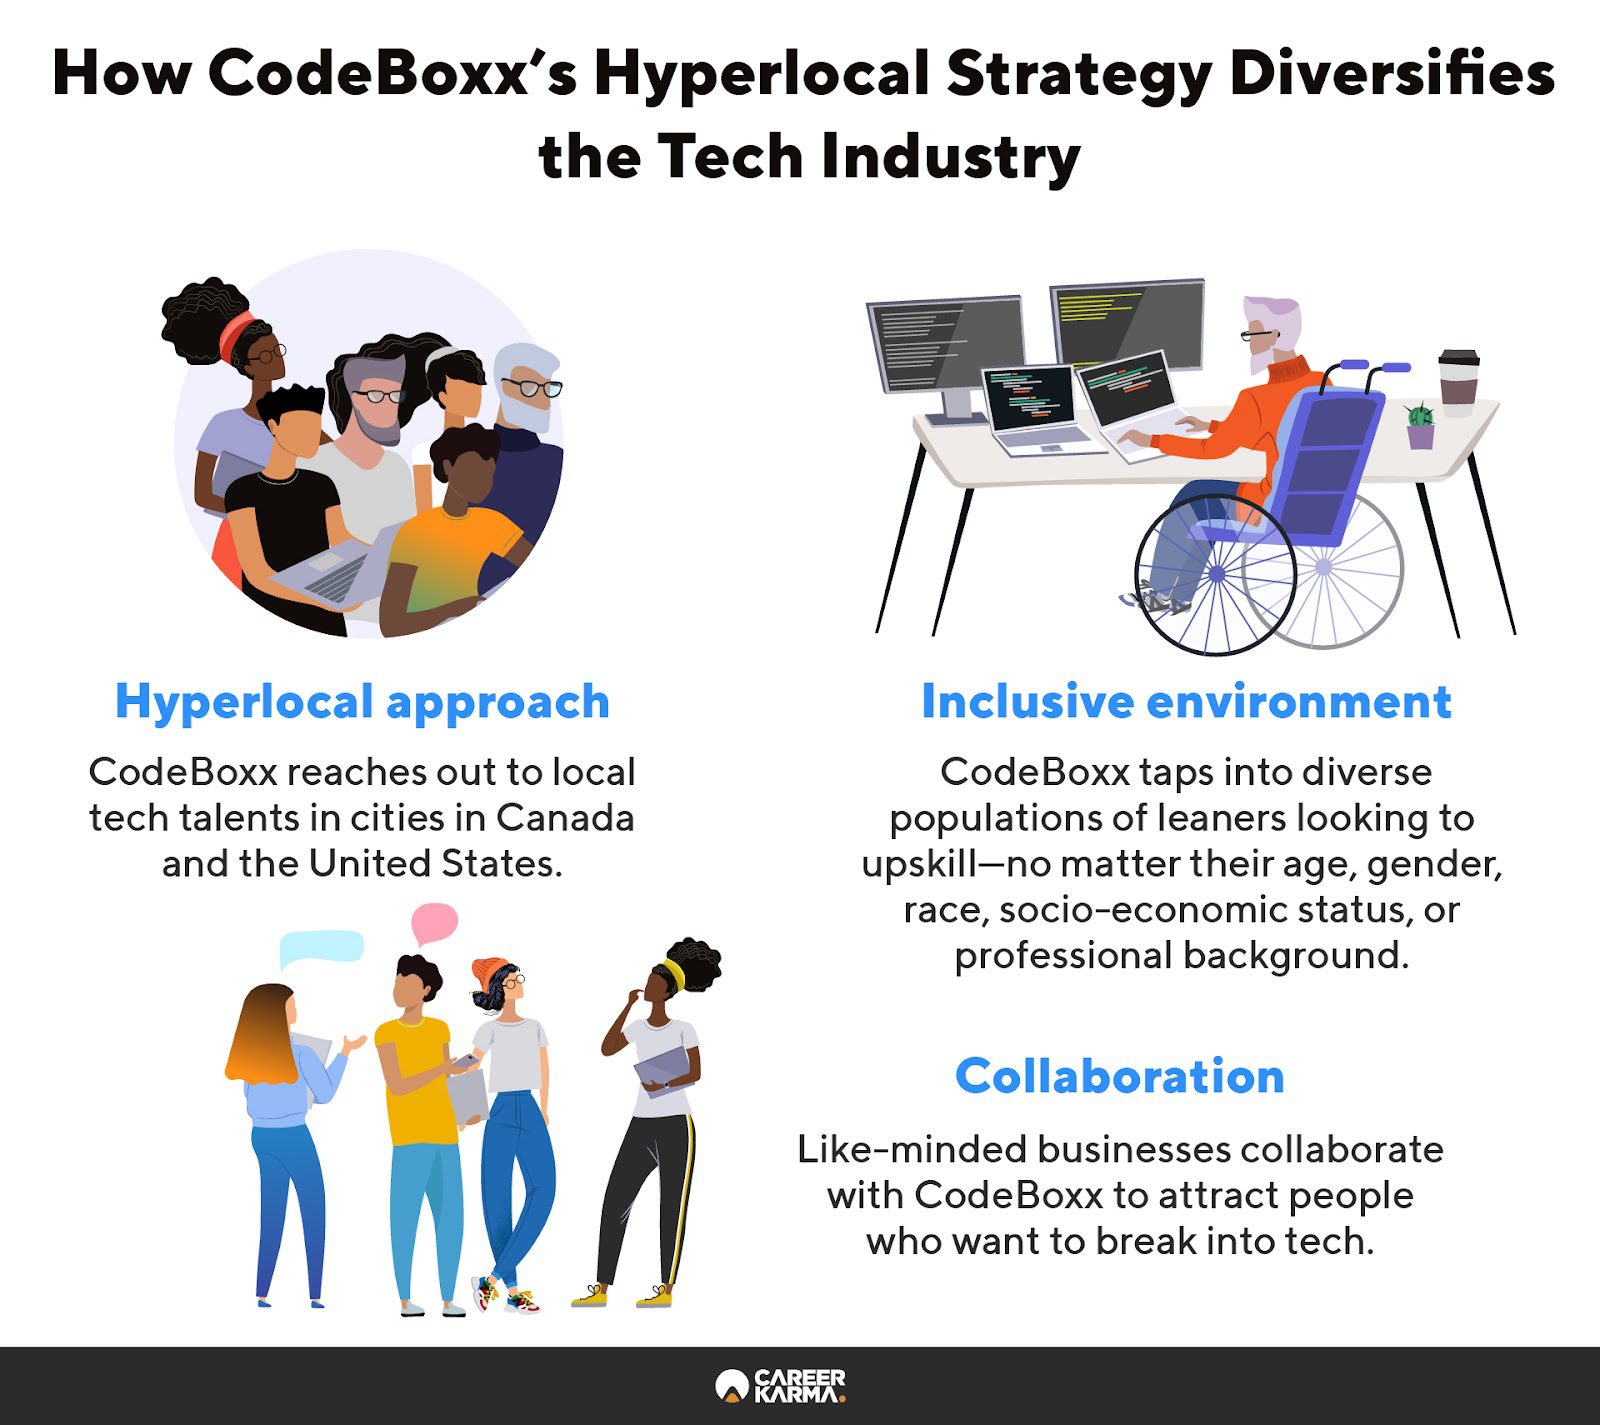 An infographic highlighting CodeBoxx’s hyperlocal strategy